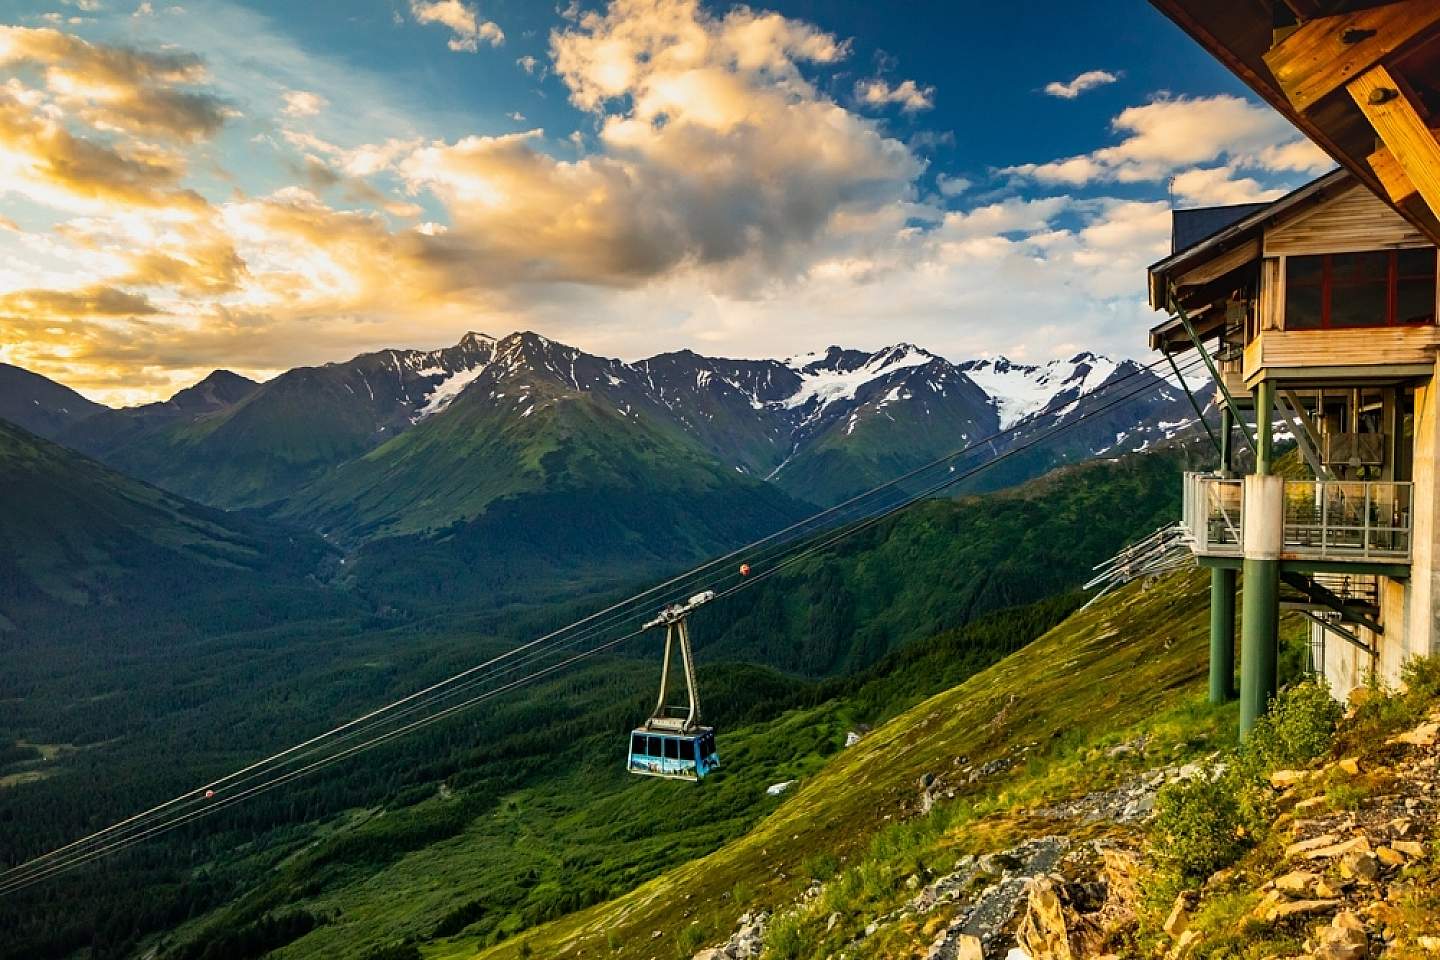 Your dining experience begins with a stunning tram ride up Mount Alyeska